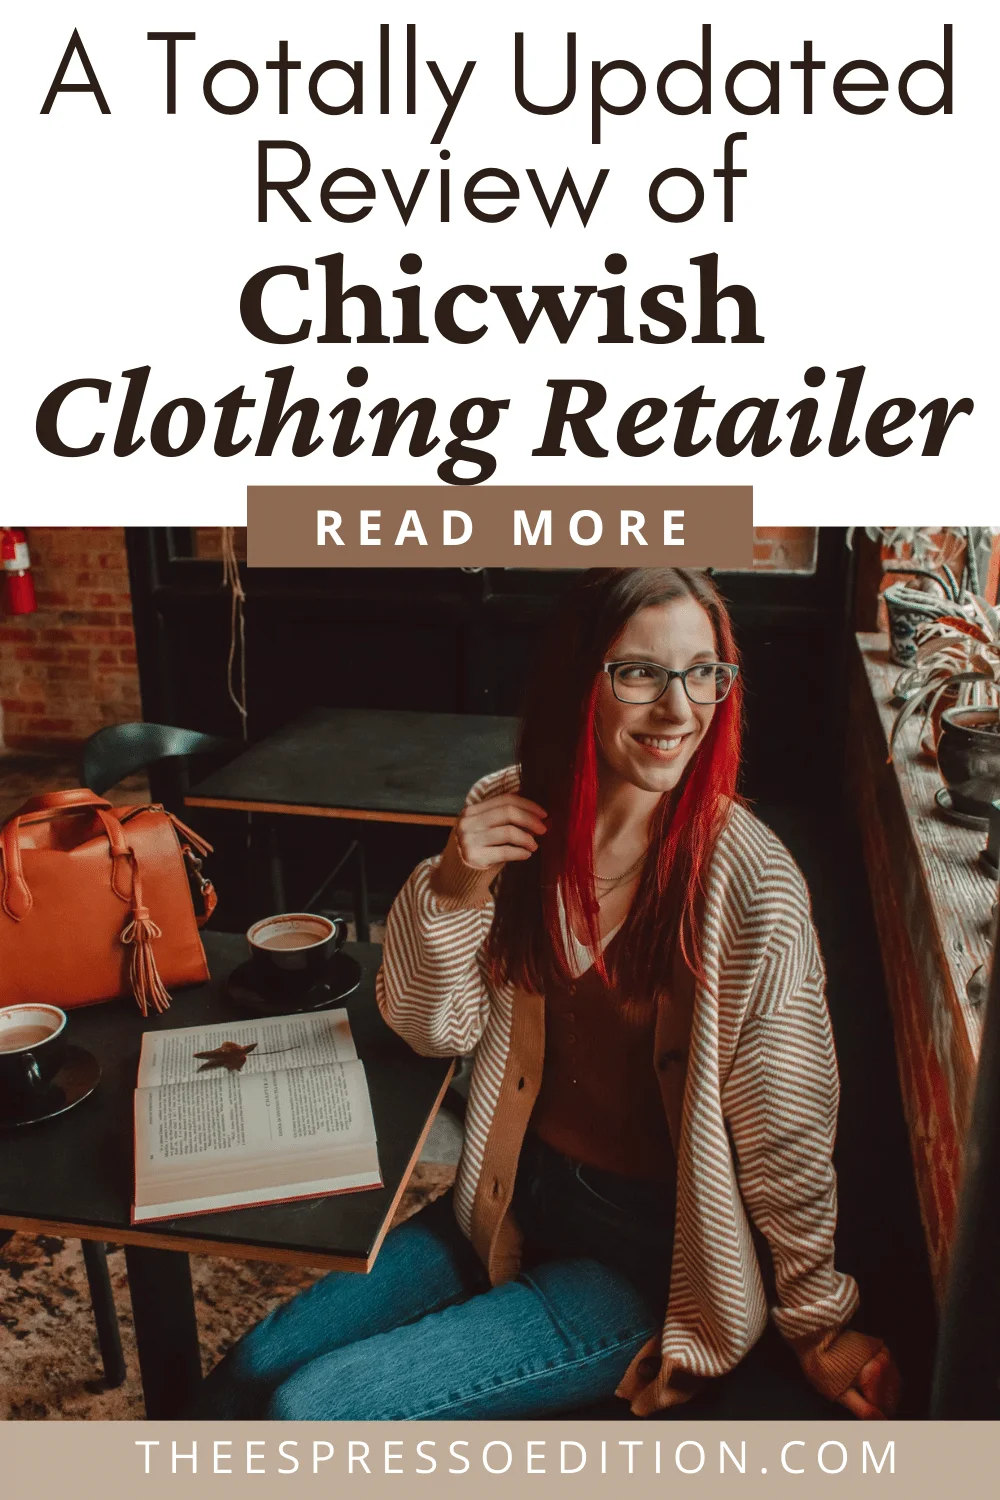 Do I Still Like Shopping At Chicwish After All These Years?